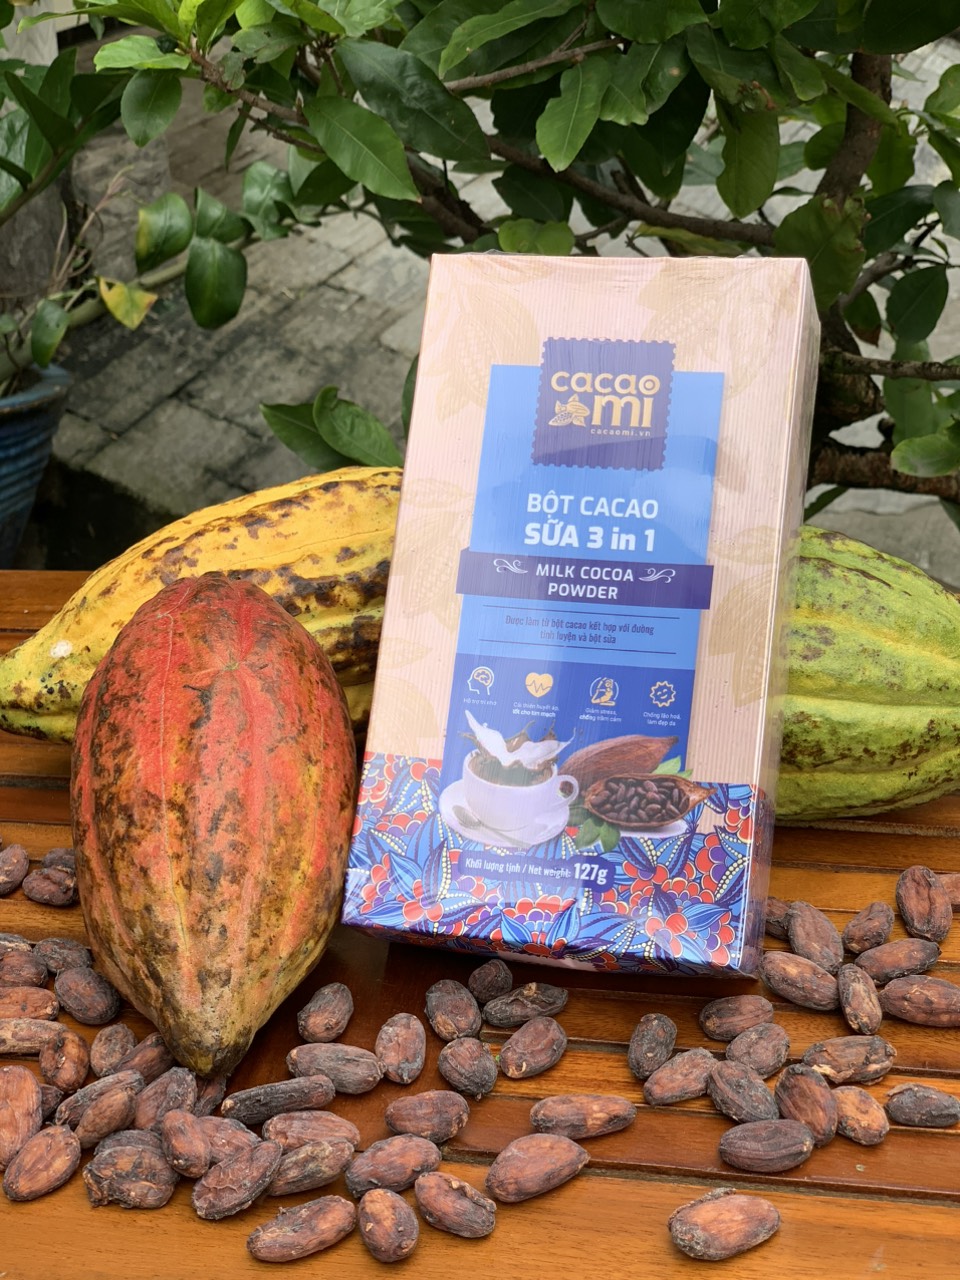 hop cacao sua 3in1 127 gr